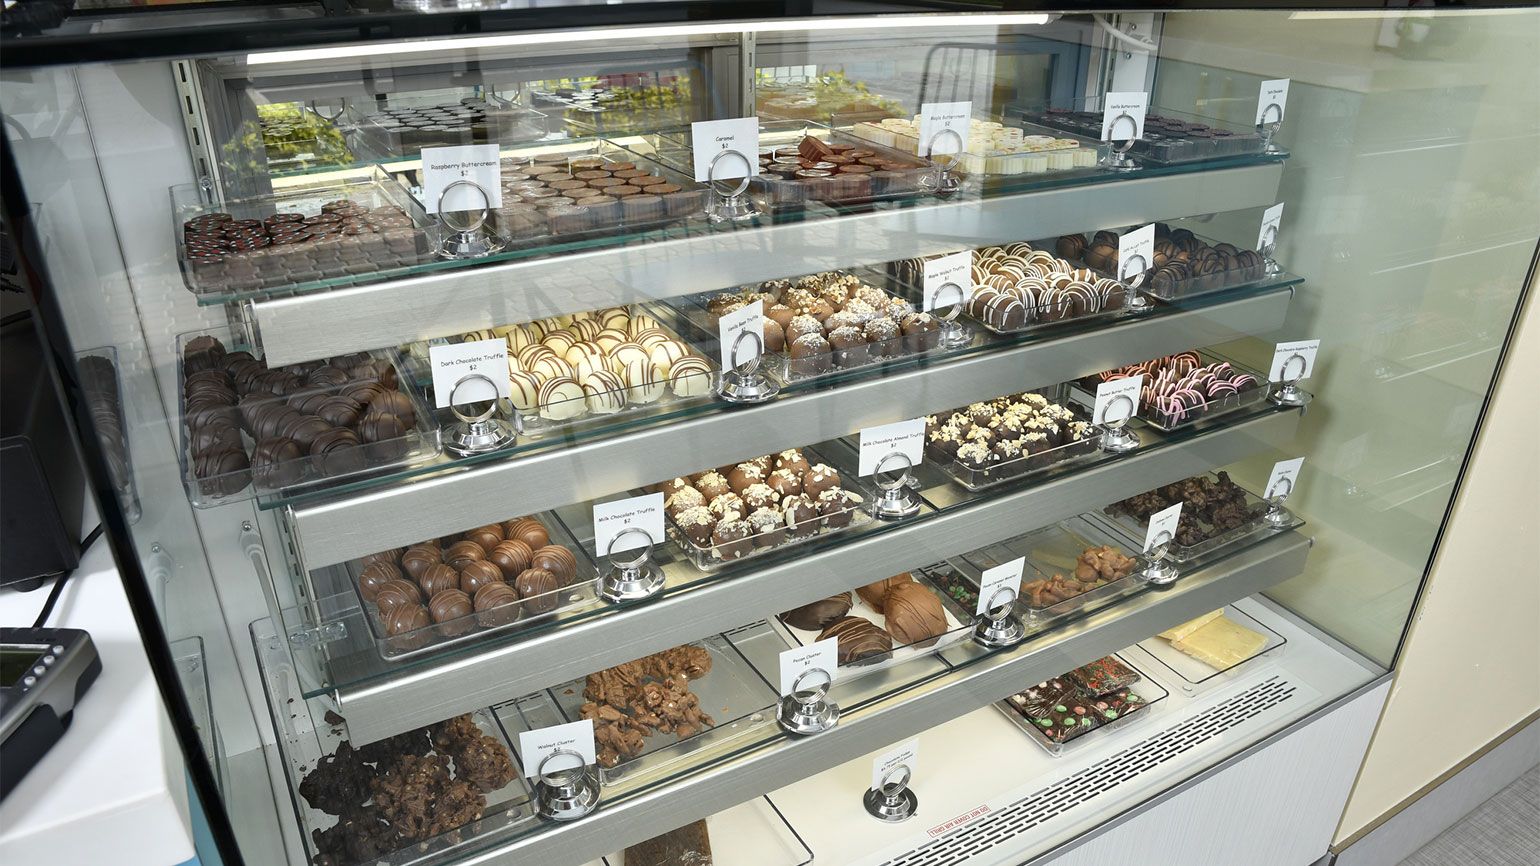 The display counter at the Chocolate Spectrum boasts a wide array of baked goods and chocolate treats